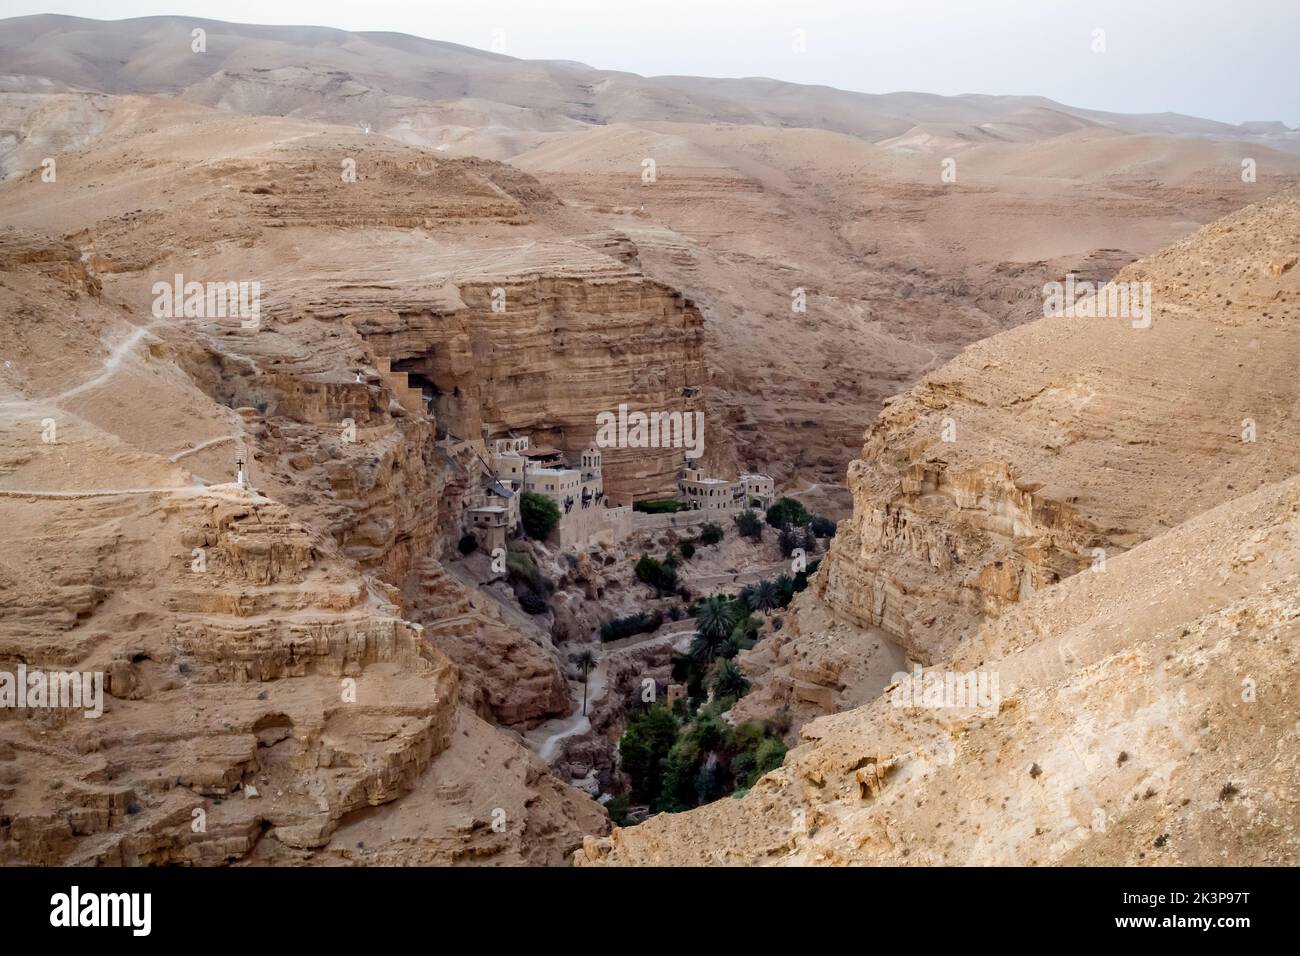 The Monastery of St George of Koziba, nestled in the lush valley of the Wadi Qelt, Judaean or Judean desert in Israel Stock Photo